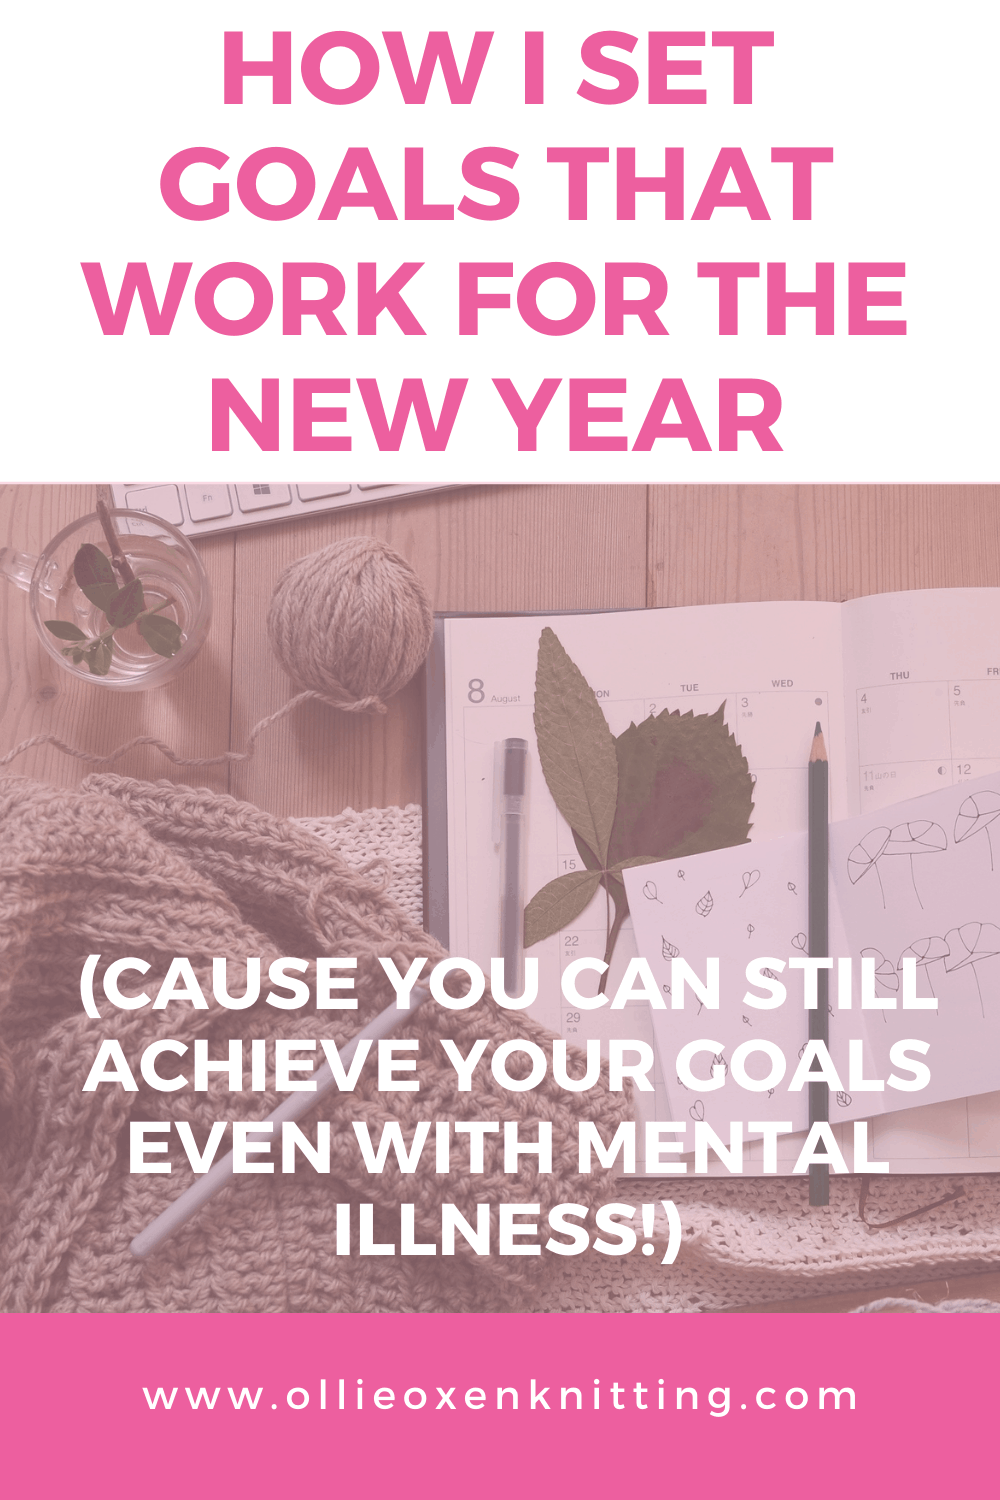 How I Set Goals That Work for the New Year (Cause You Can Still Achieve Your Goals Even with Mental Illness!) | Ollie Oxen Knitting